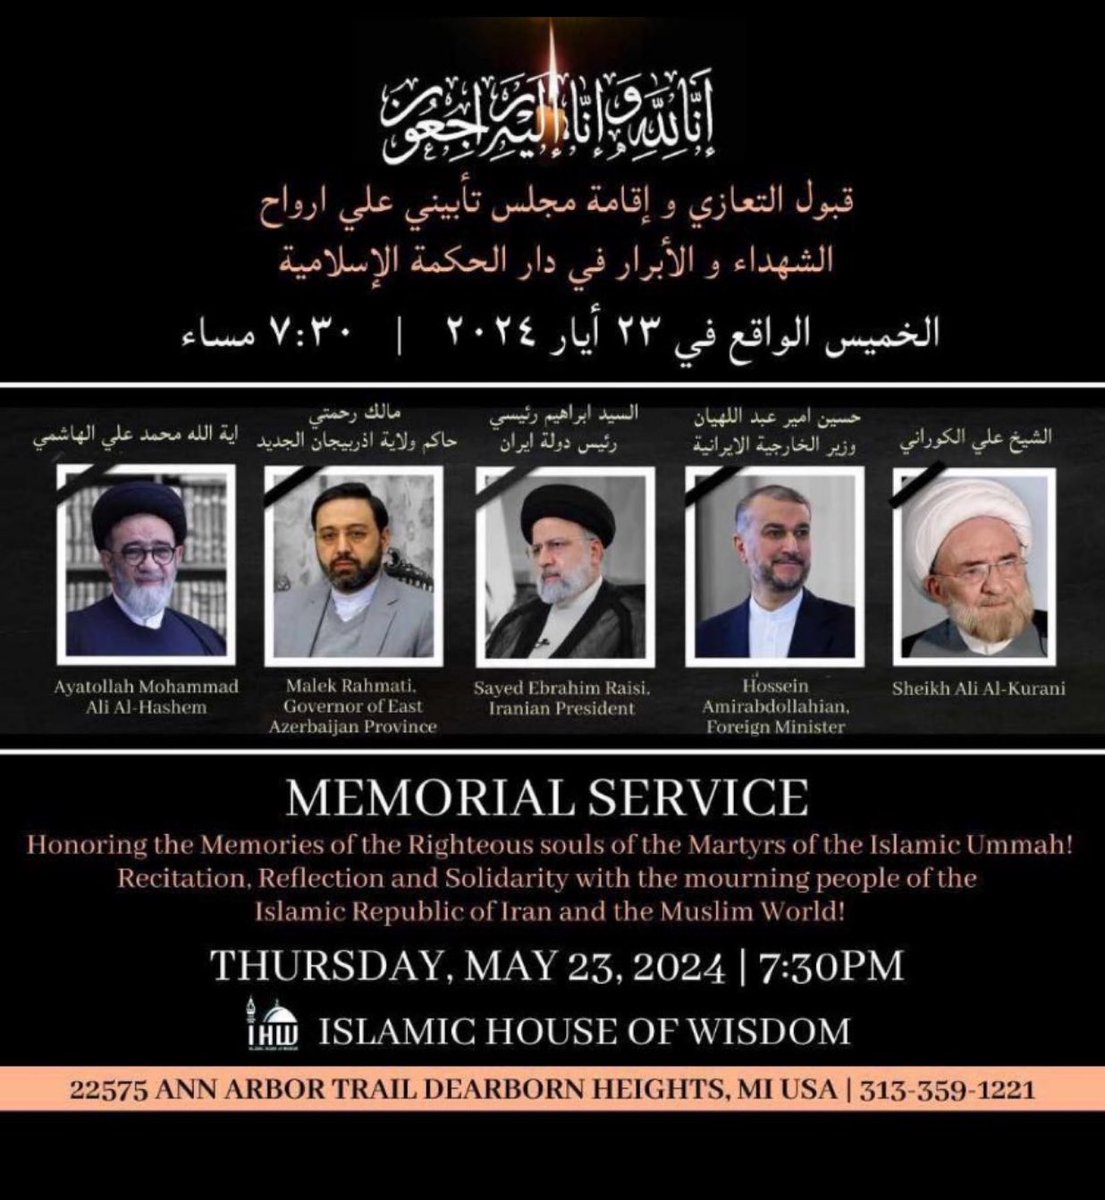 They are literally holding a funeral service for the Butcher of Tehran Raisi in Dearborn Michigan. This should not be permitted. This was was a mass murderer who directly had a hand in the deaths or disappearances of tens of thousands of Iranians. Here you go Joe Biden. These